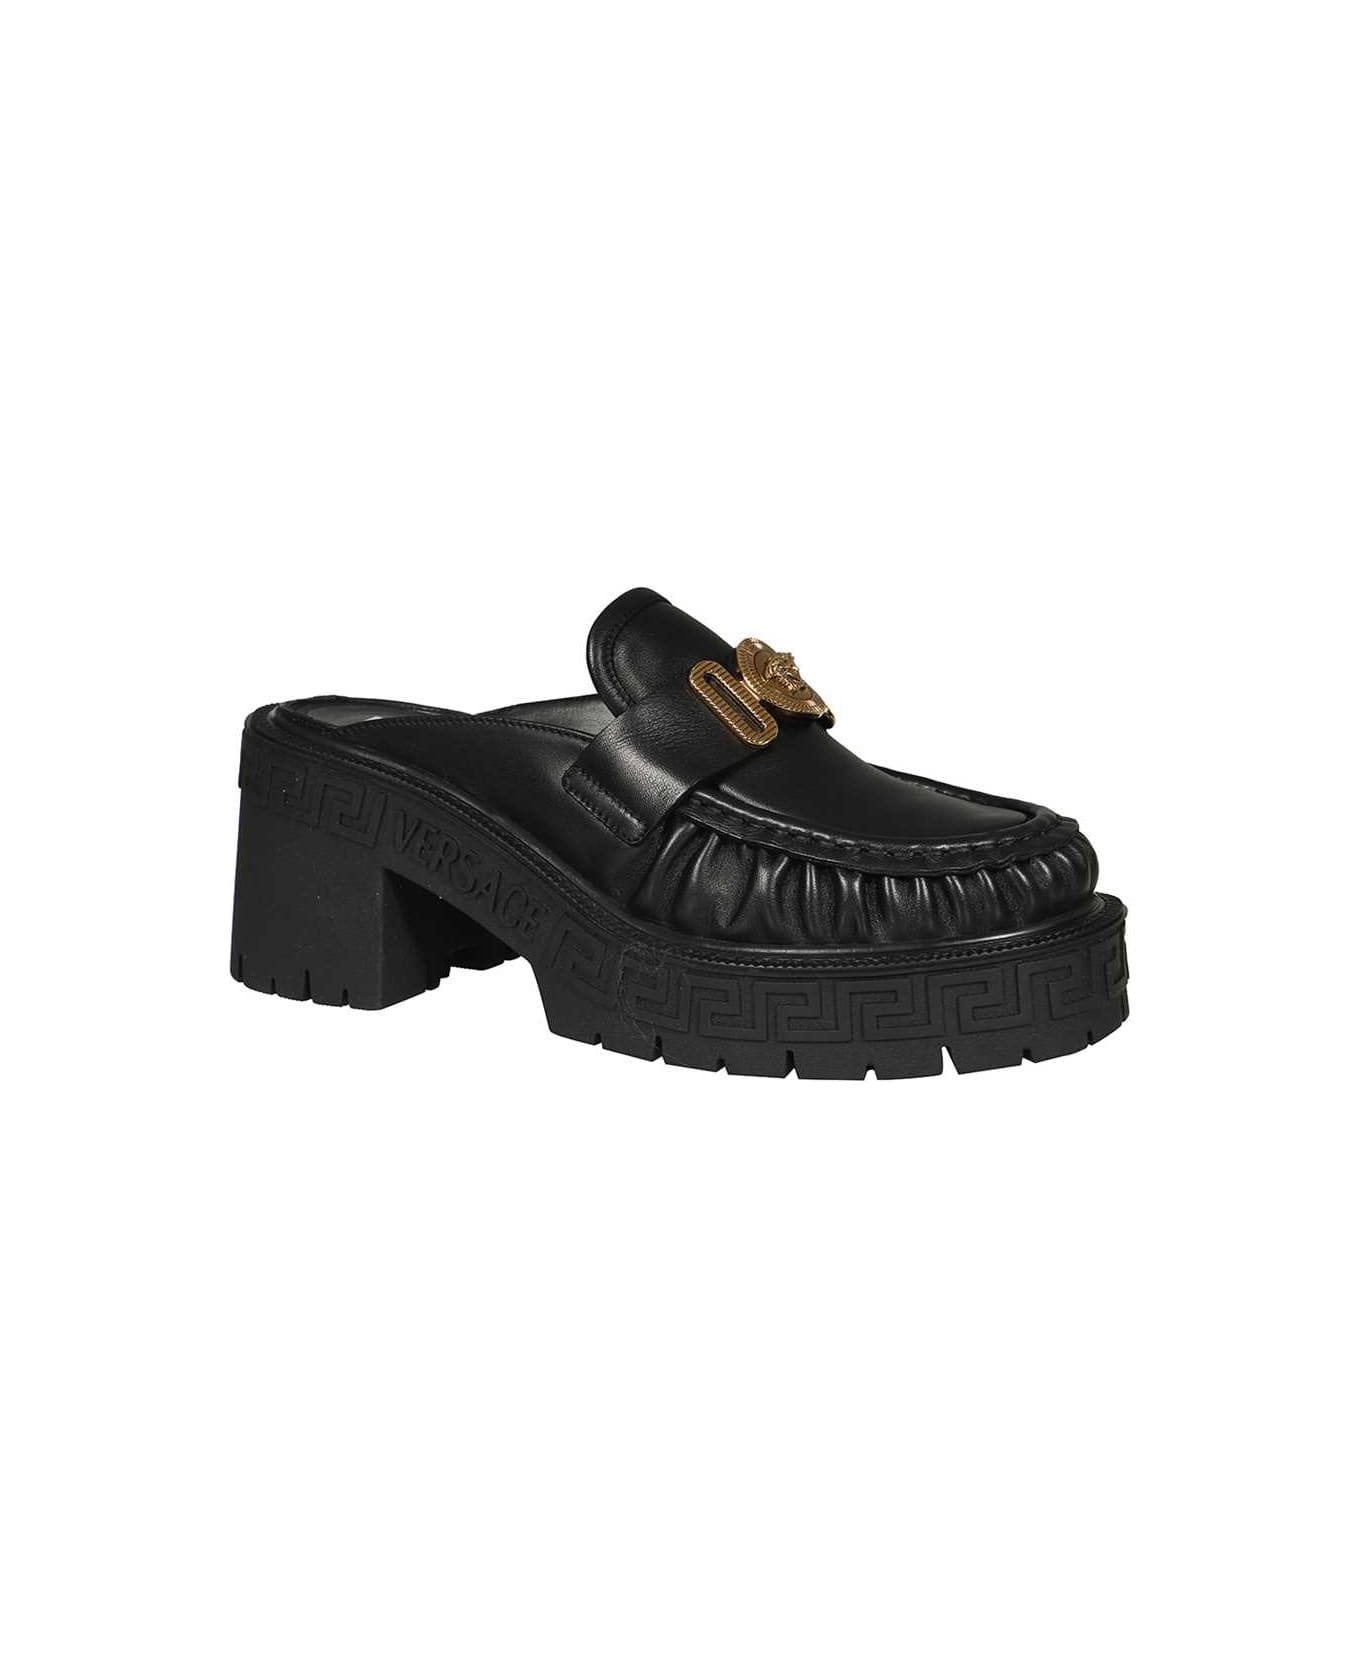 Versace Leather Mules - black